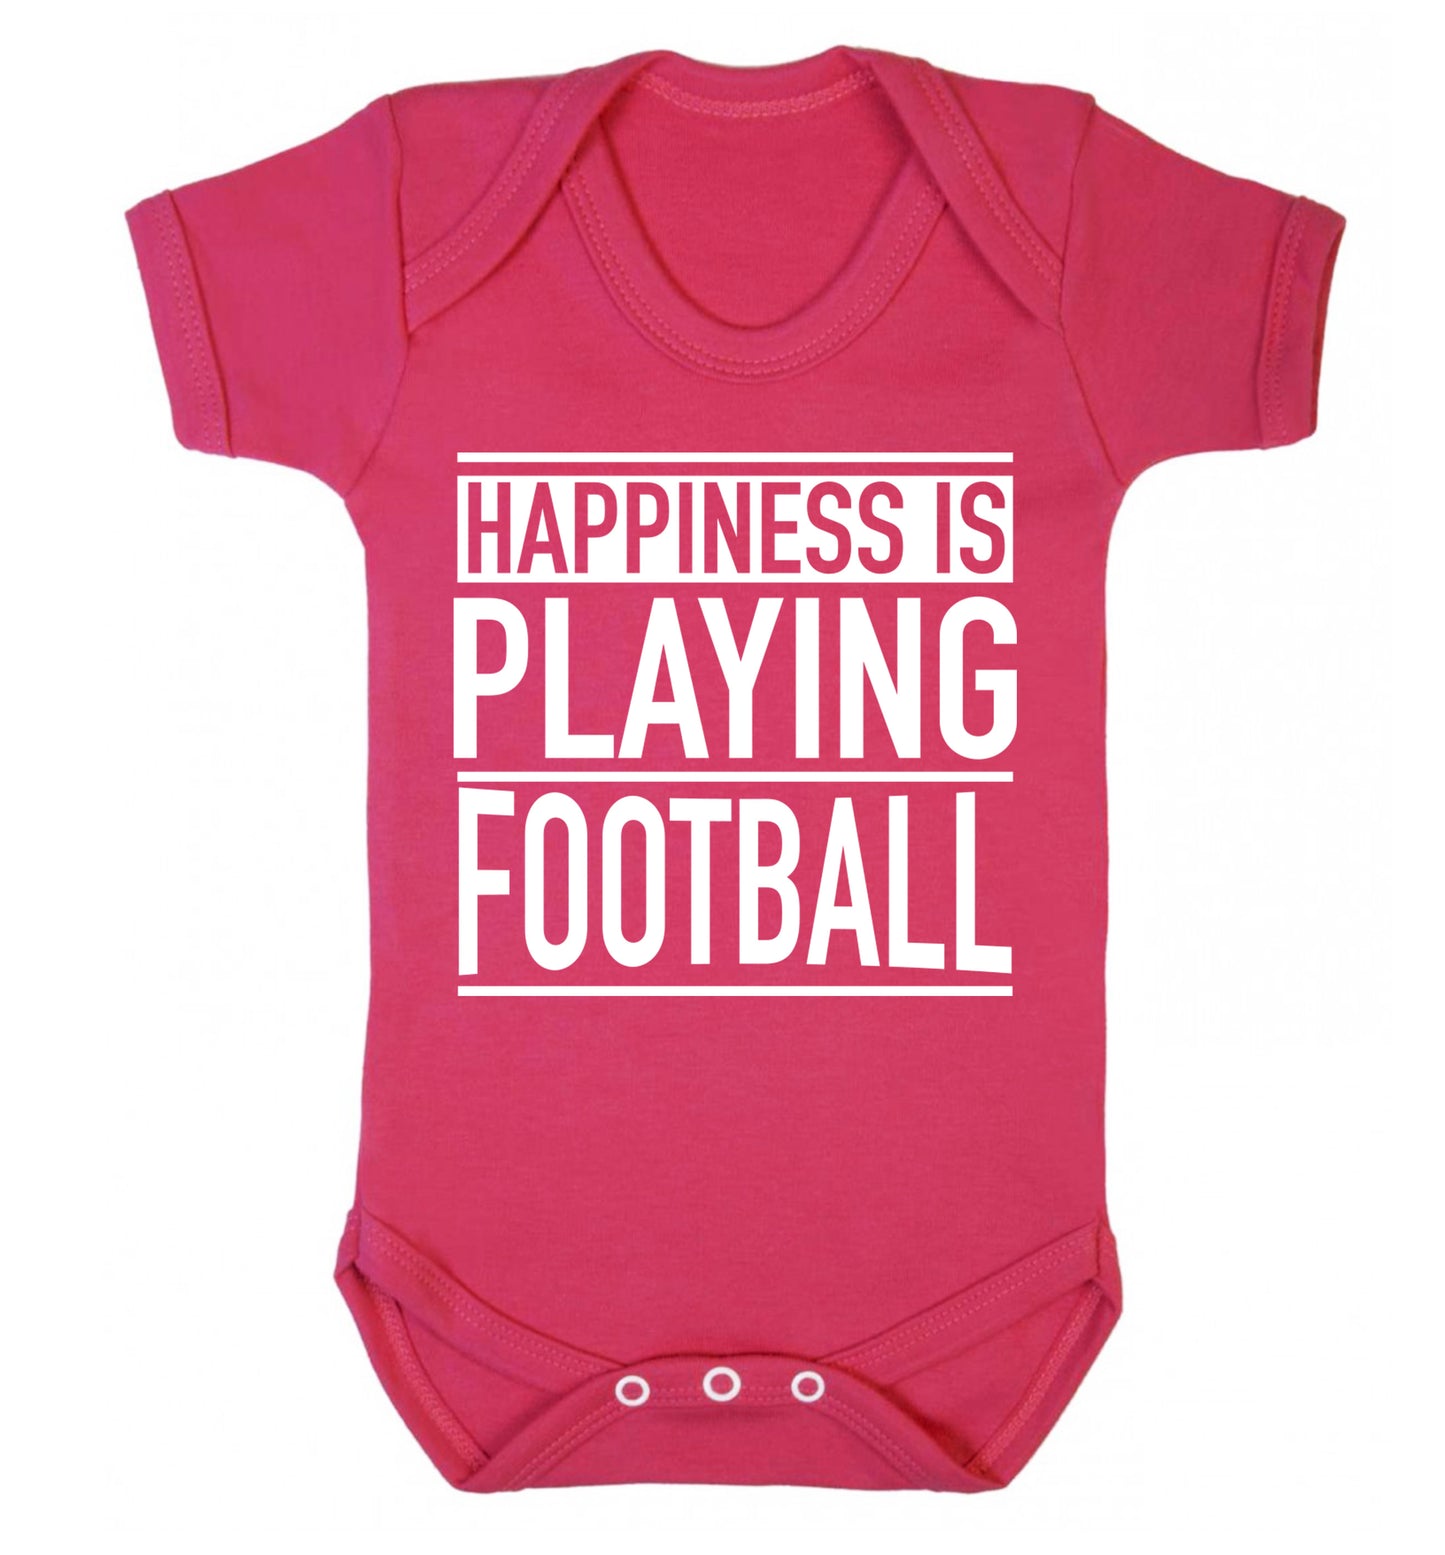 Happiness is playing football Baby Vest dark pink 18-24 months